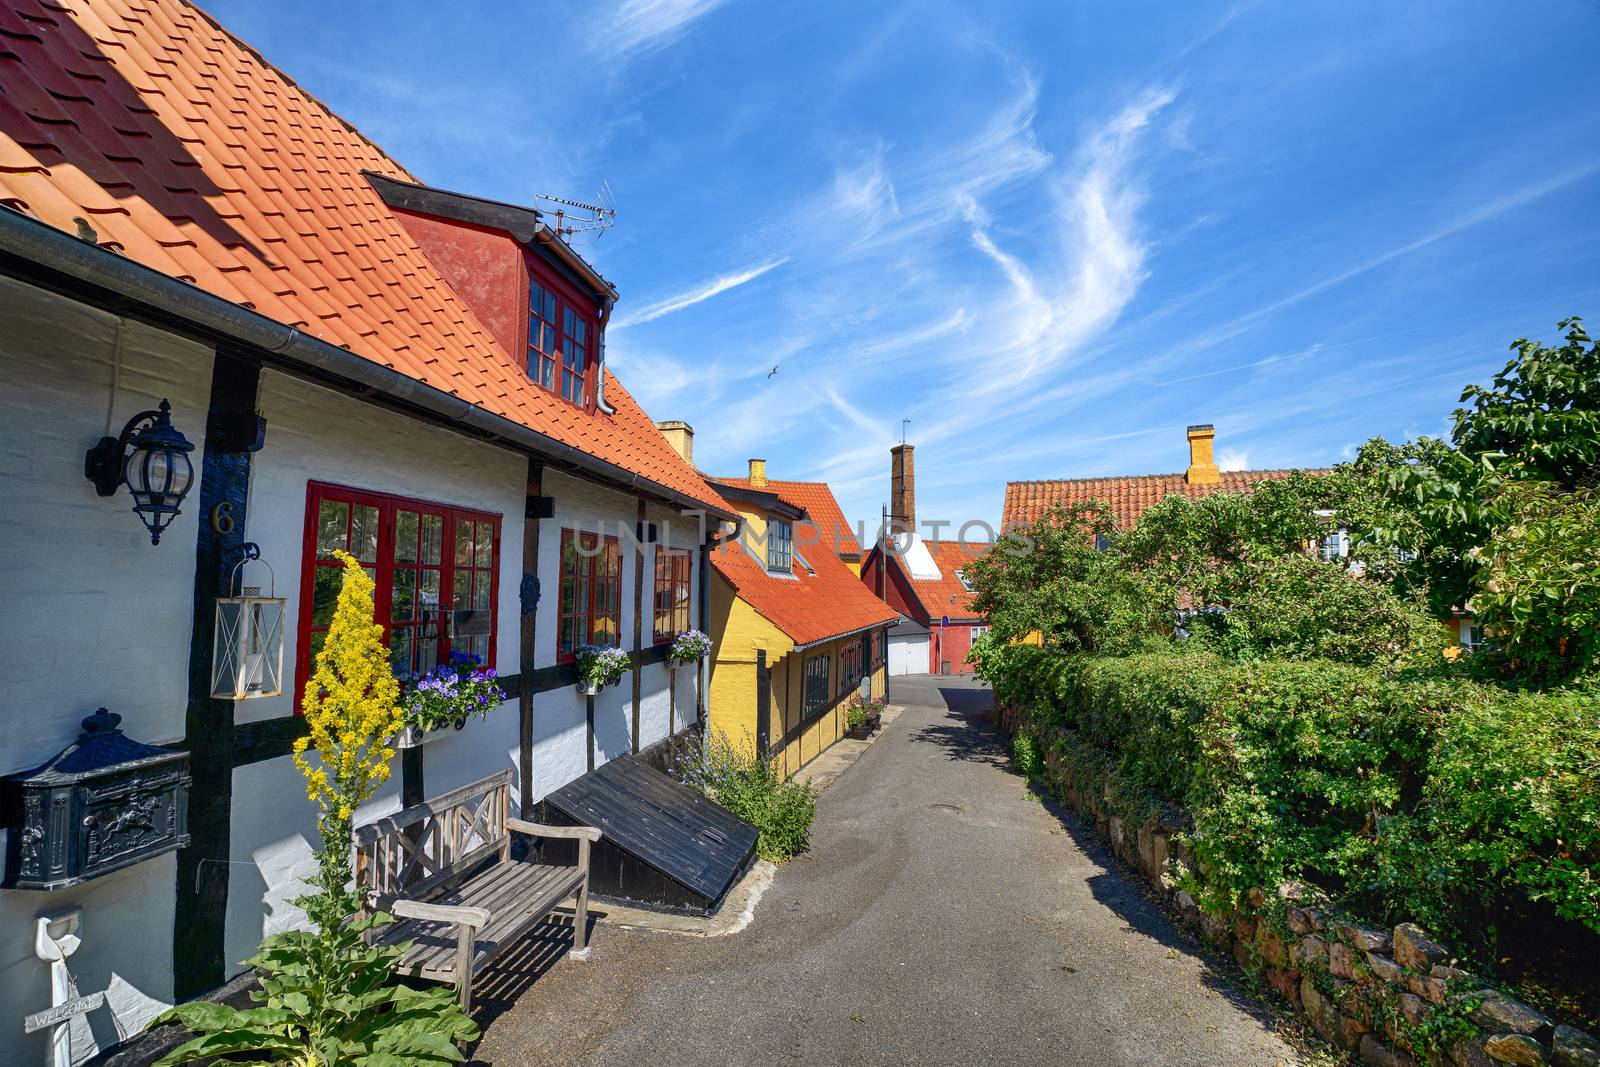 Scandinavian street in a small village in the summer with colorful buildings under a blue sky